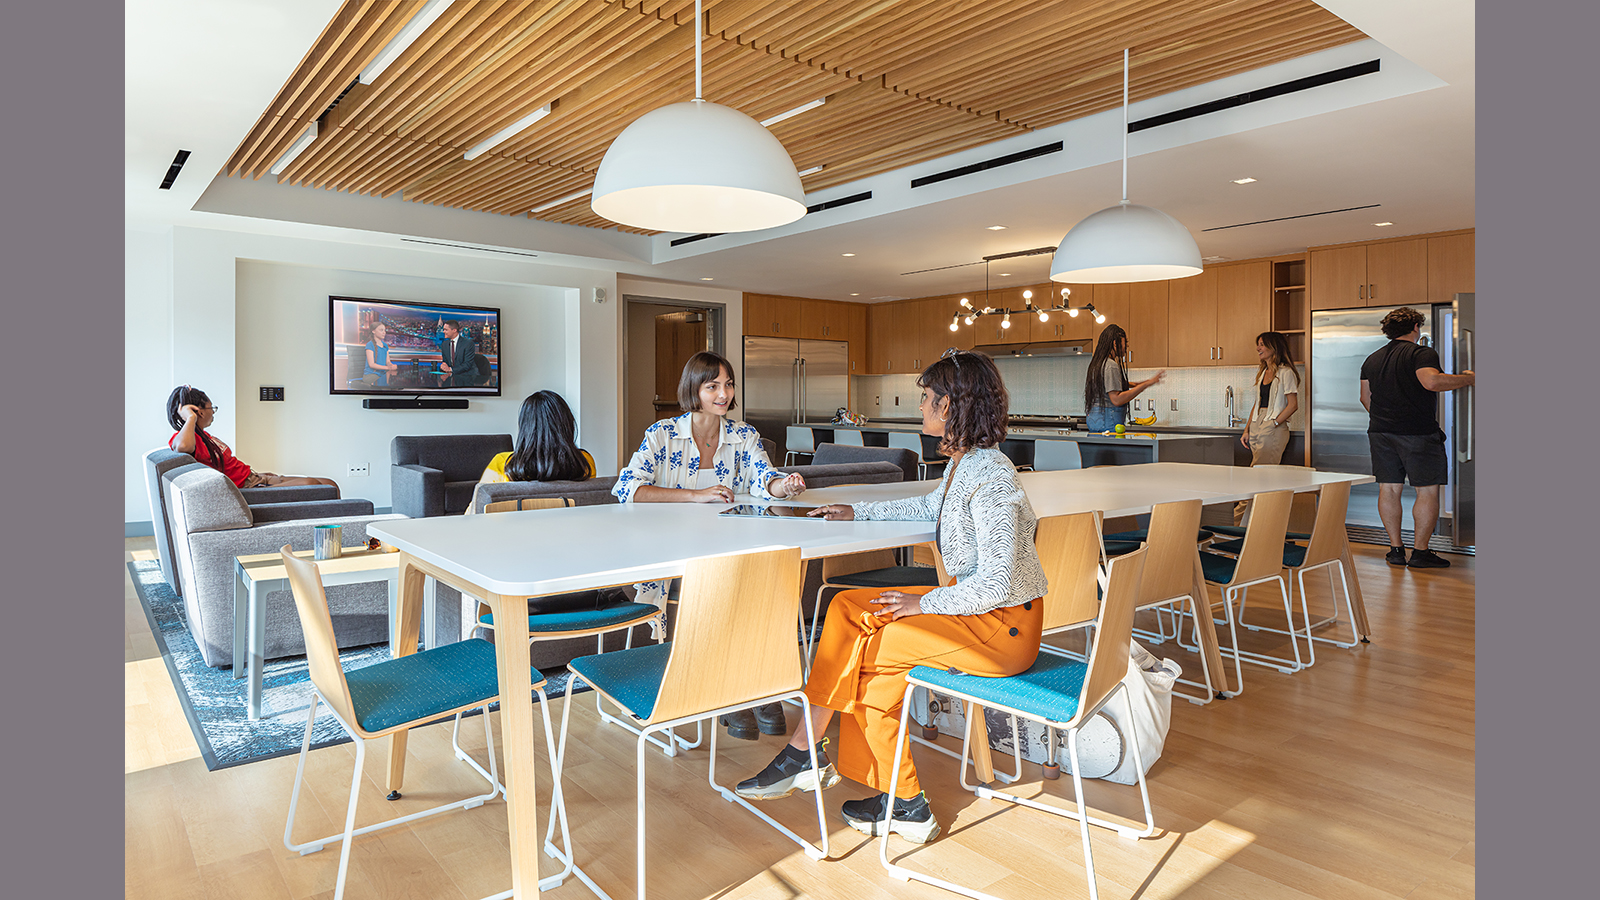 Loyola Marymount University Student Housing in Los Angeles, students sit in the kitchen/lounge